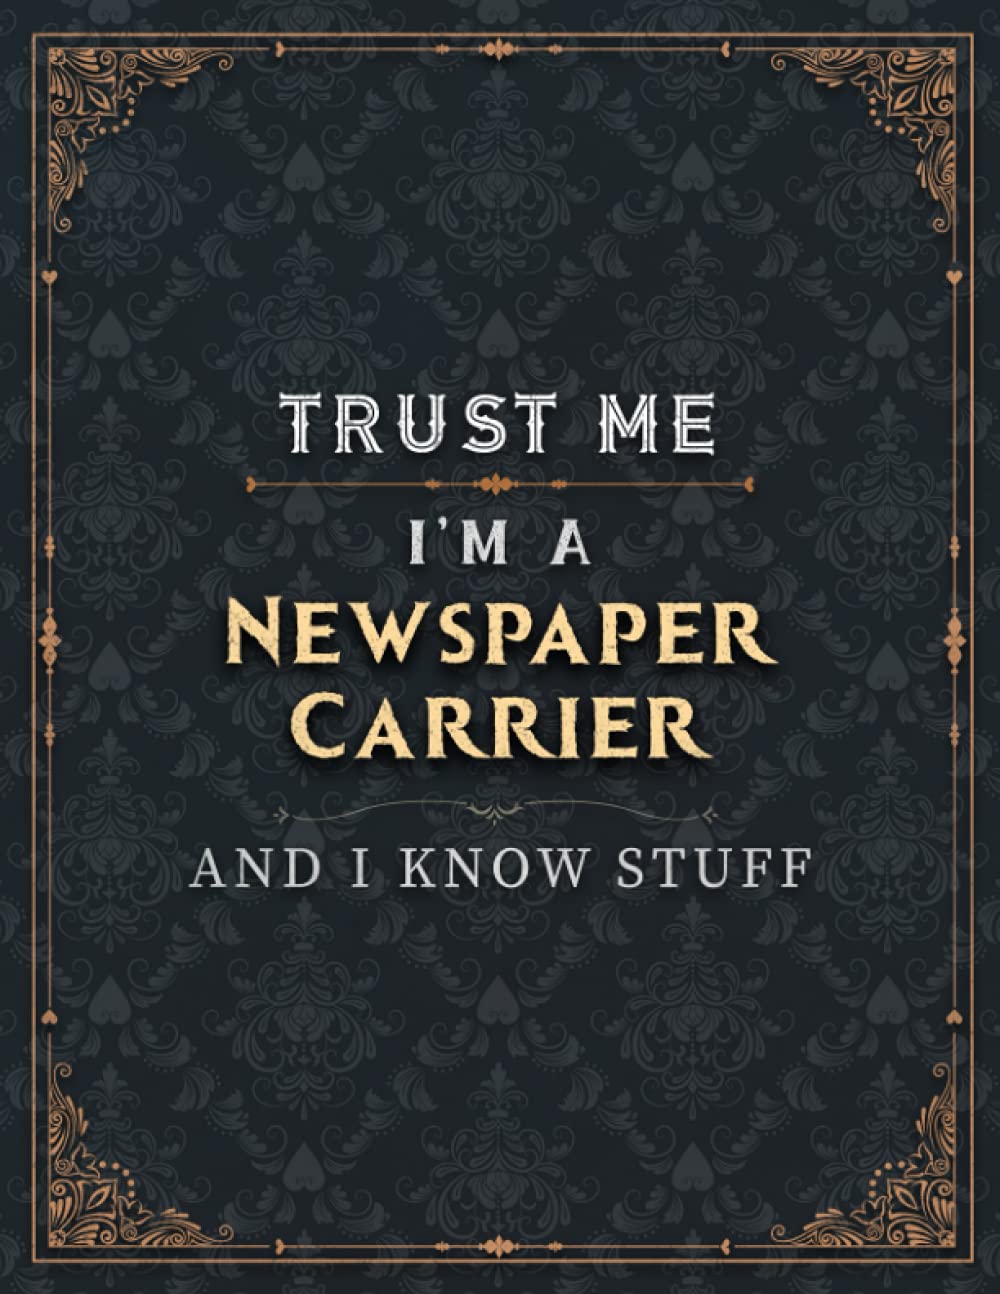 Newspaper Carrier Lined Notebook - Trust Me I'm A Newspaper Carrier And I Know Stuff Job Title Working Cover To Do List Journal: 21.59 x 27.94 cm, ... Business, Over 100 Pages, A4, College